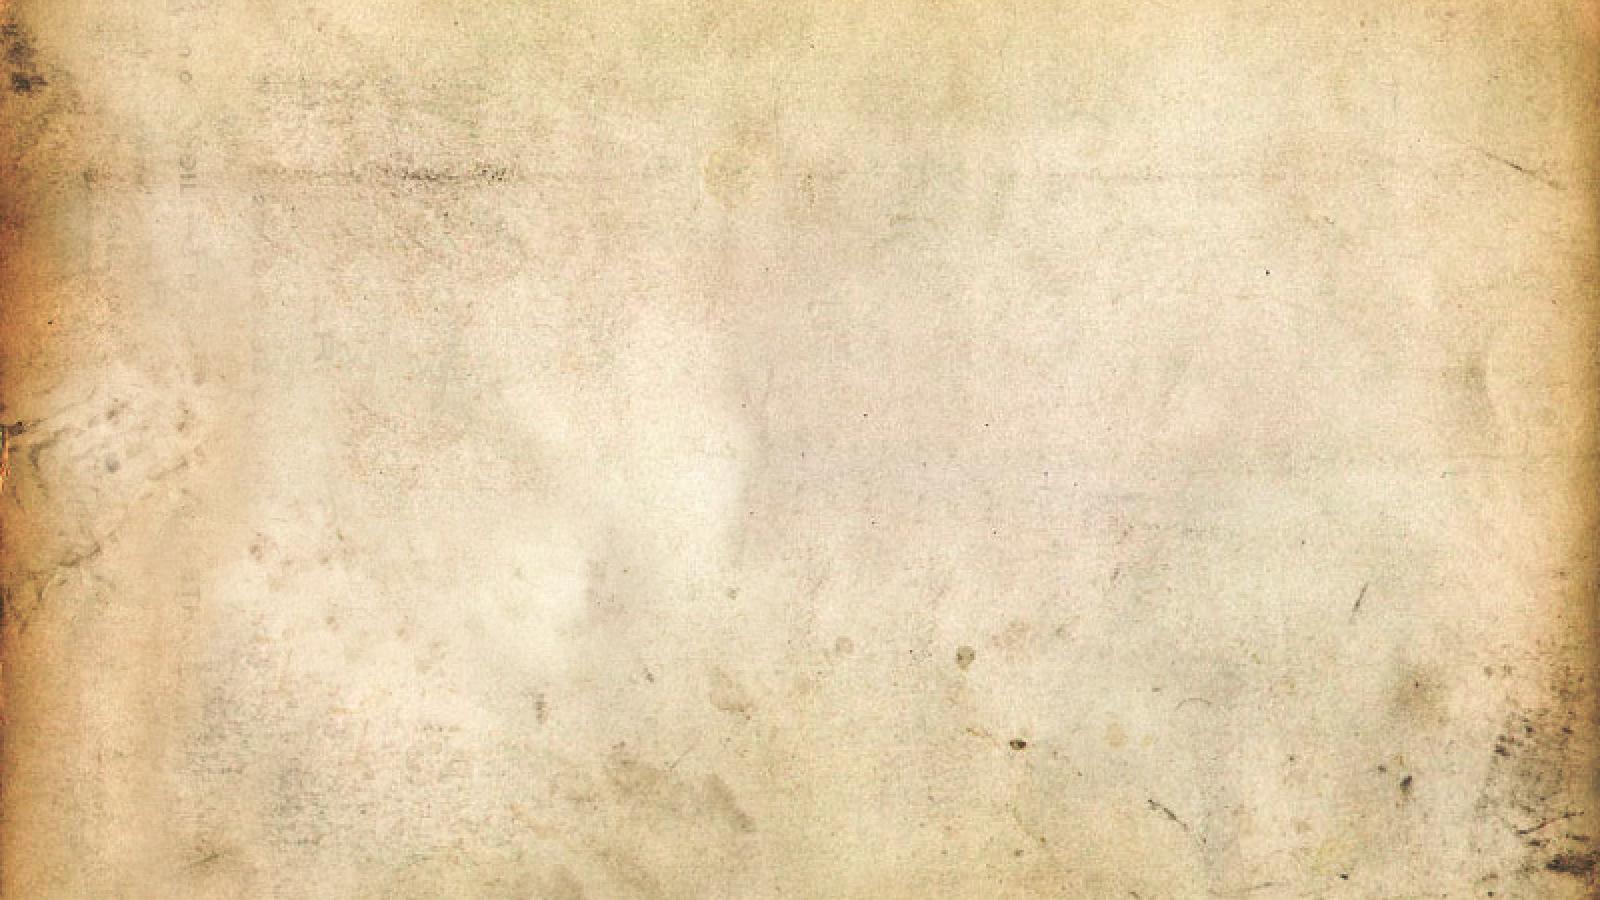 Grunge paper textures wallpaper - (#182245) - High Quality and ...